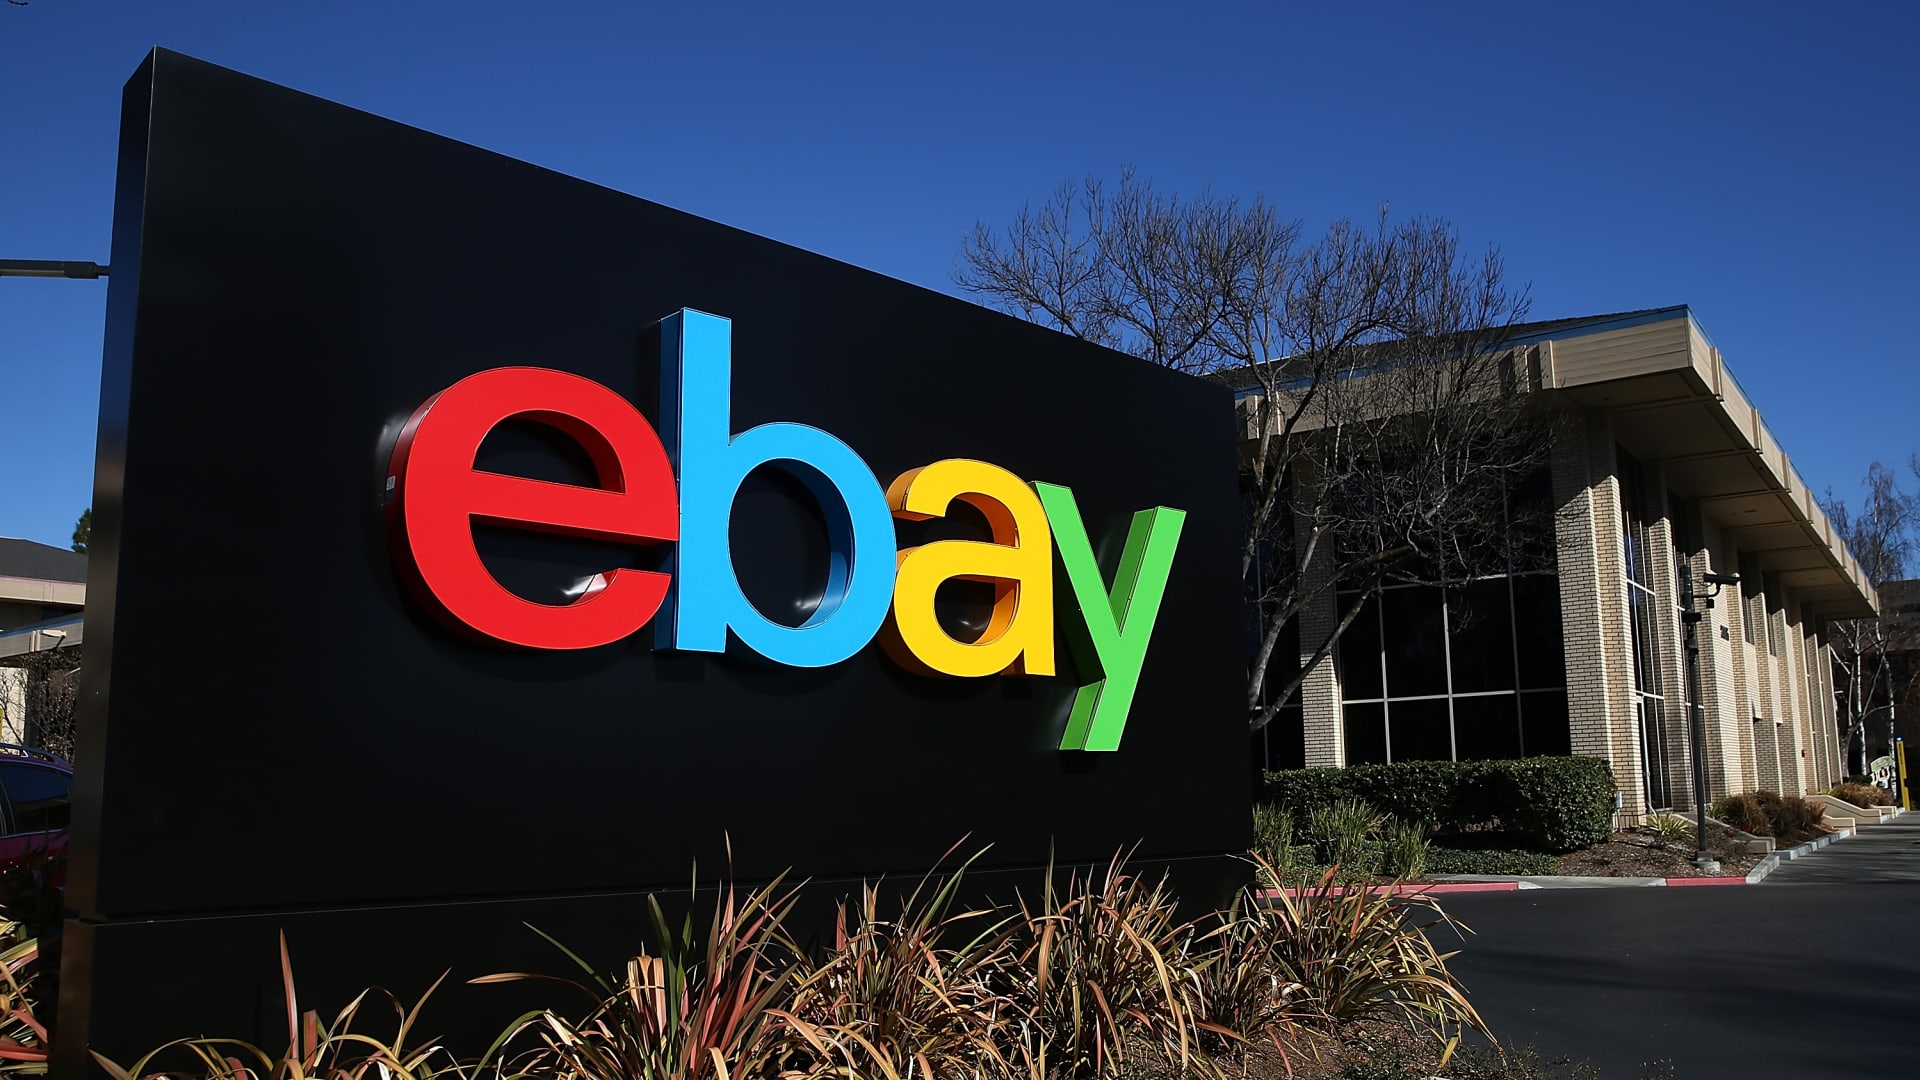 EBay is entering the NFT business, with an assist from hockey legend Wayne Gretzky